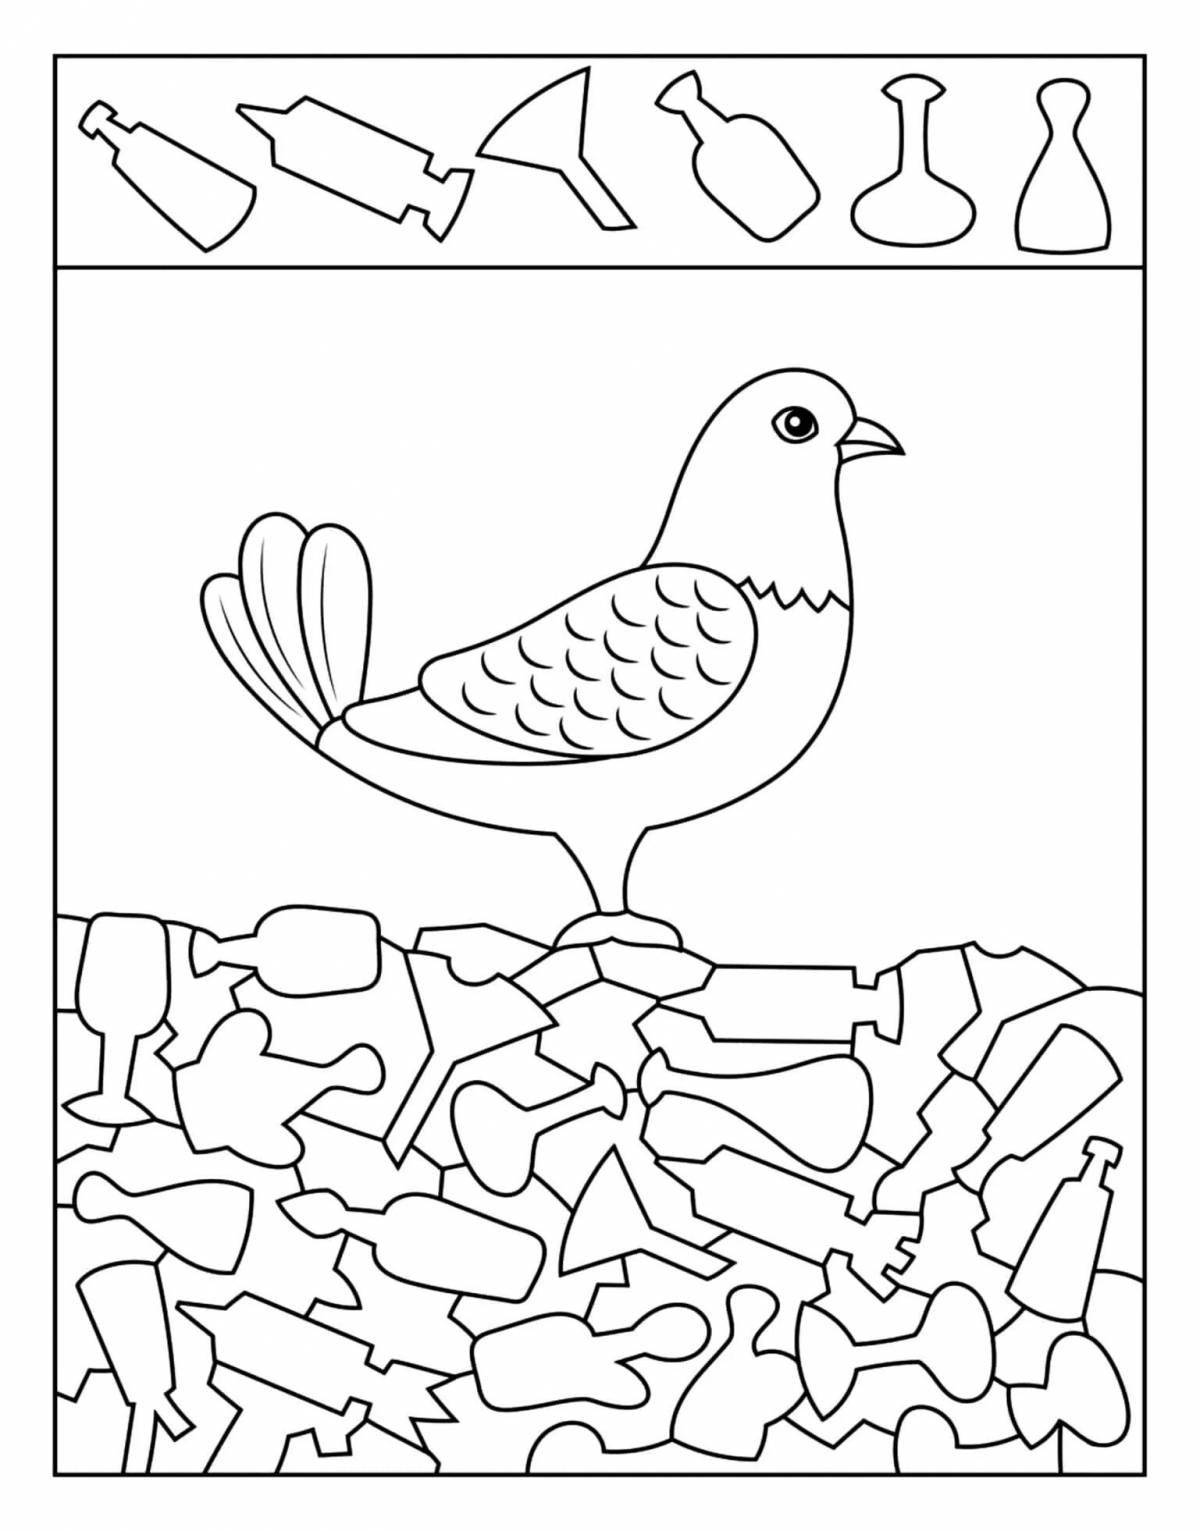 Inspirational coloring pages for 6 year olds